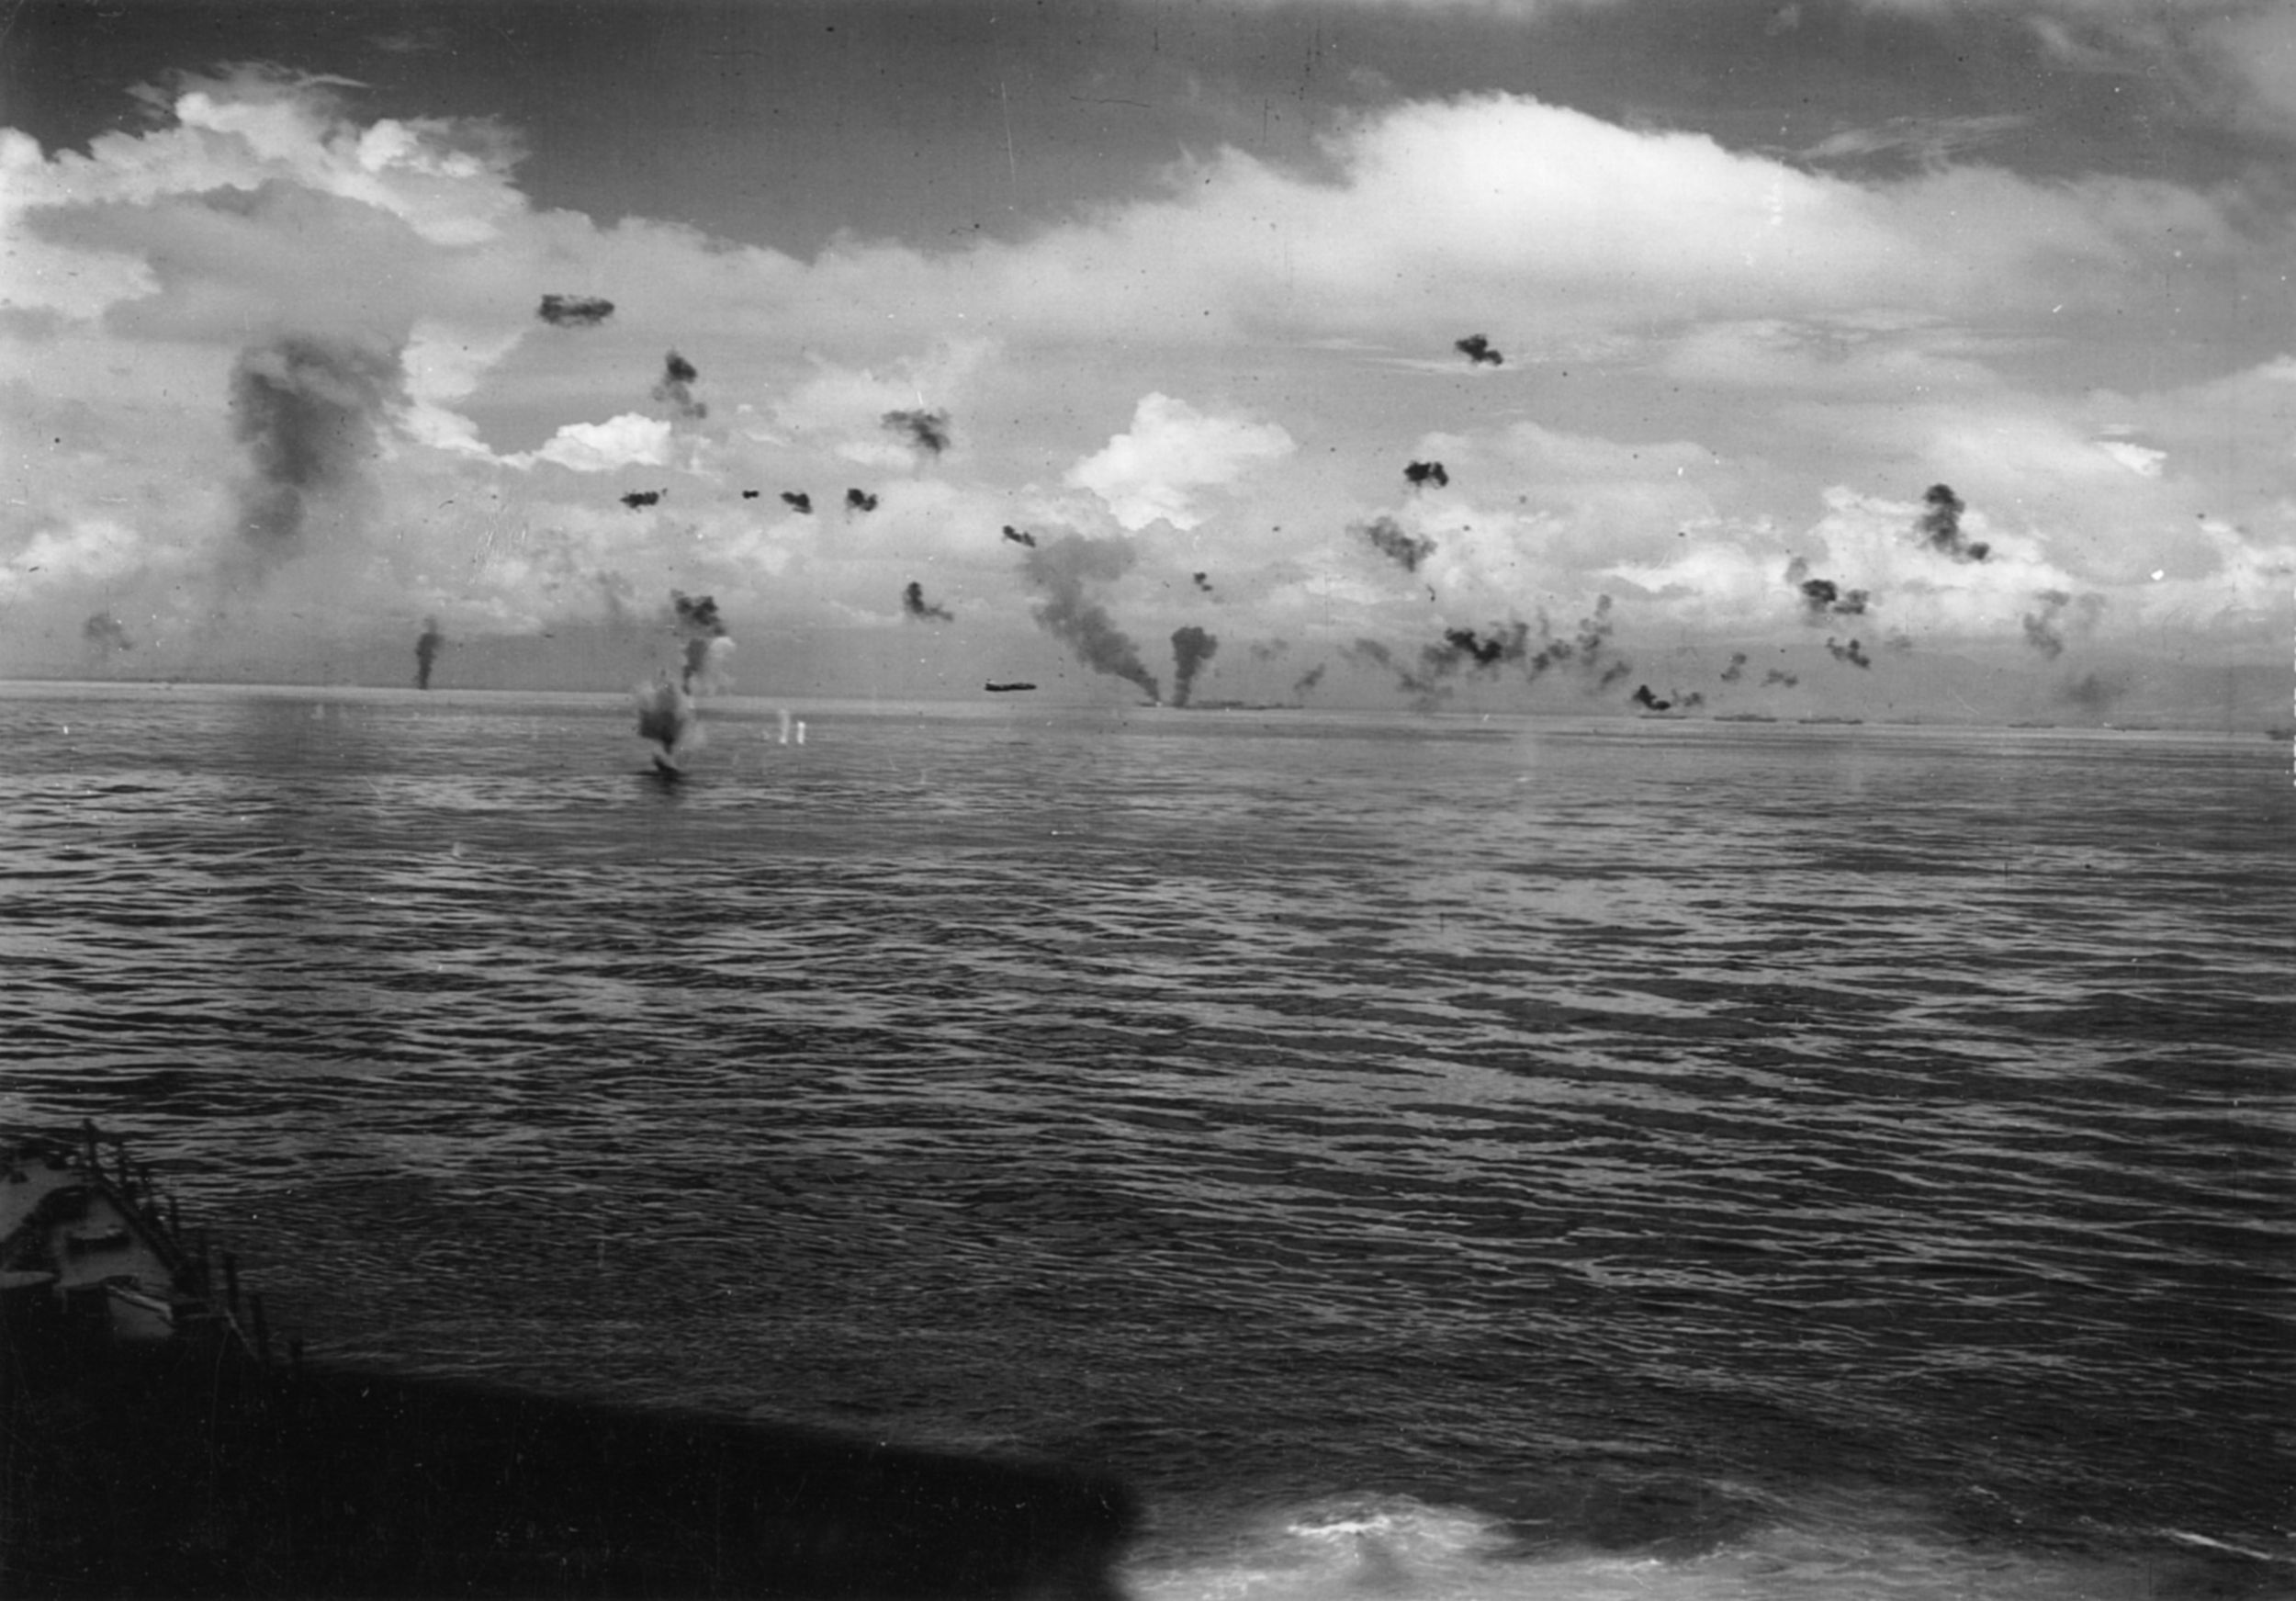 On August 8, 1942, a photographer aboard the Chicago captured this image of Japanese torpedo planes attacking American ships off of Tulagi in the Solomons. One plane streaks toward its target while two others are ablaze and antiaircraft fire dots the sky.